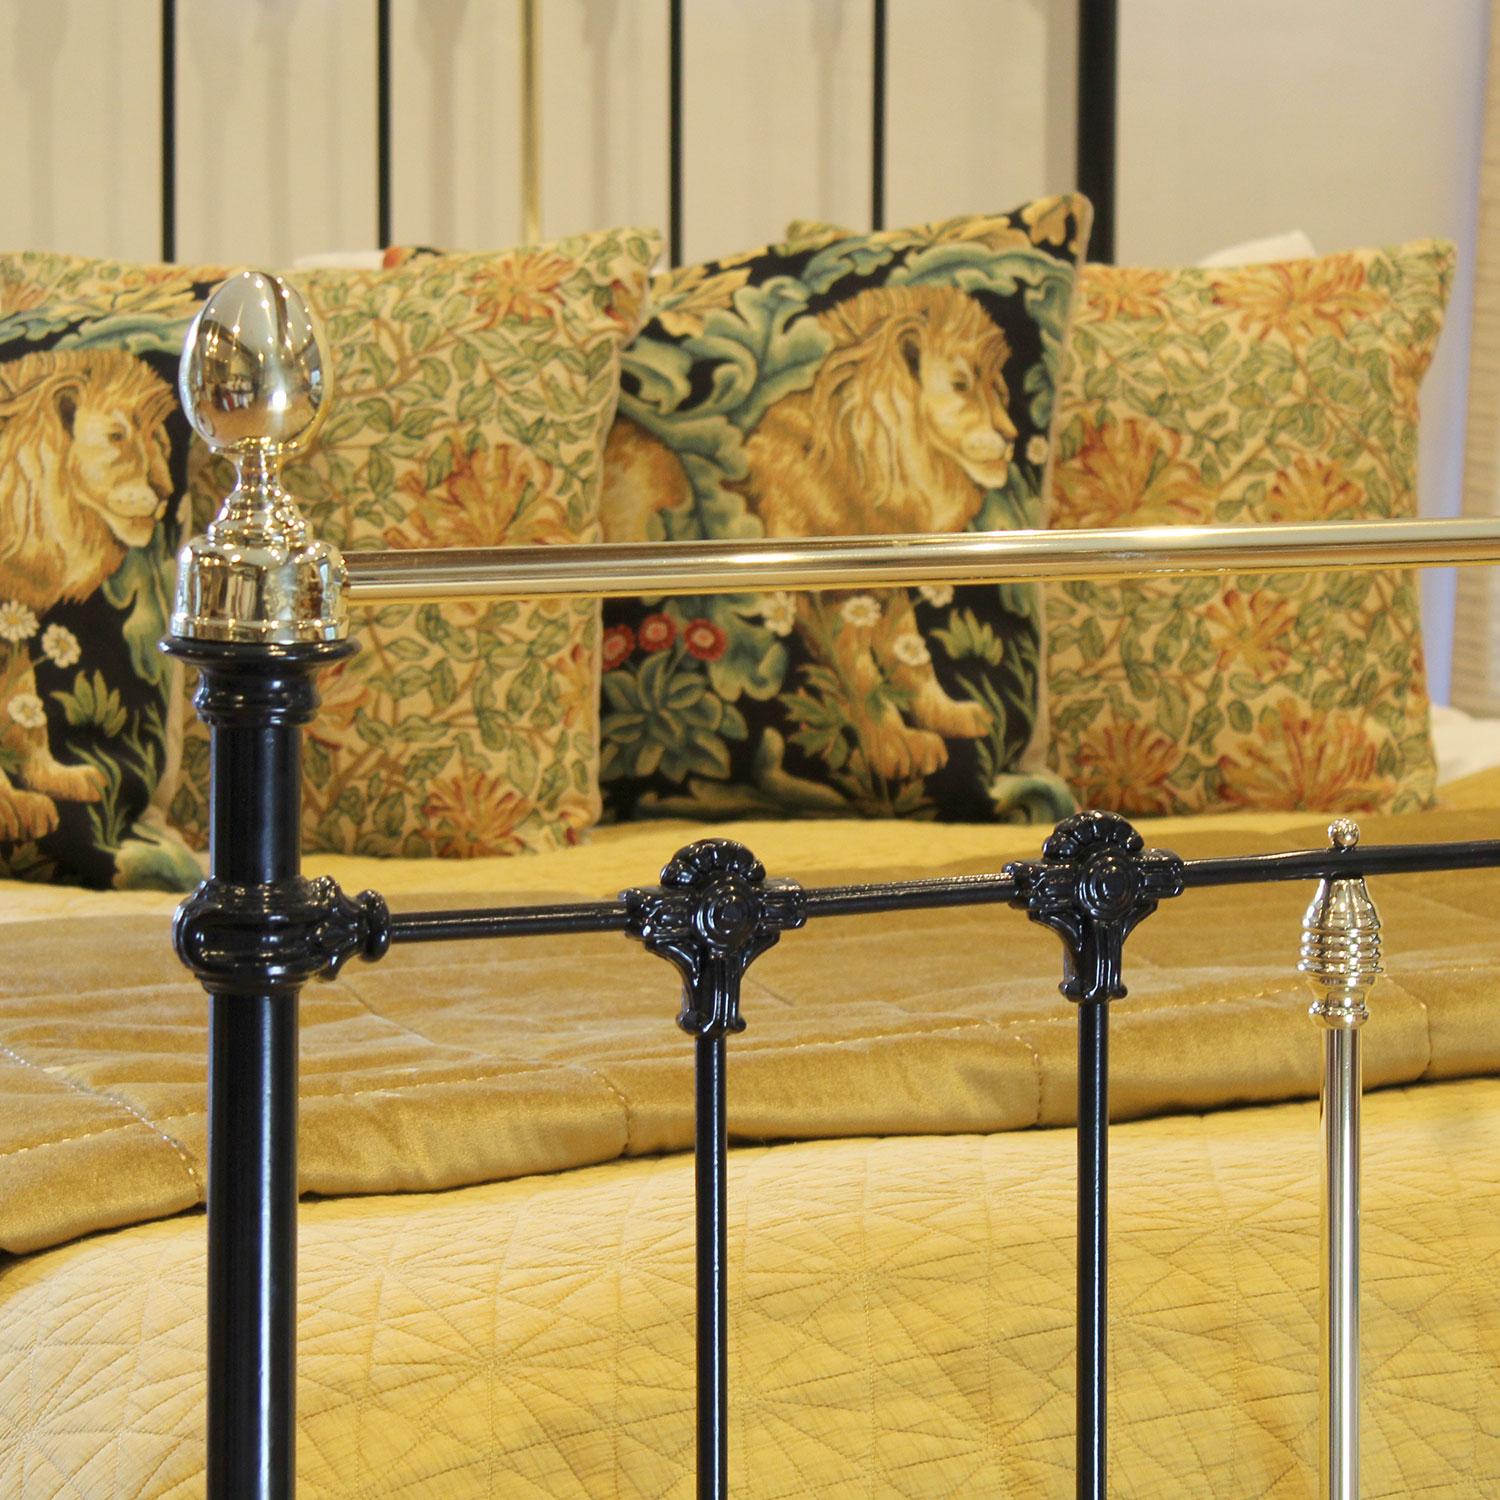 Polished Brass and Iron Antique Bed in Black, Mk266